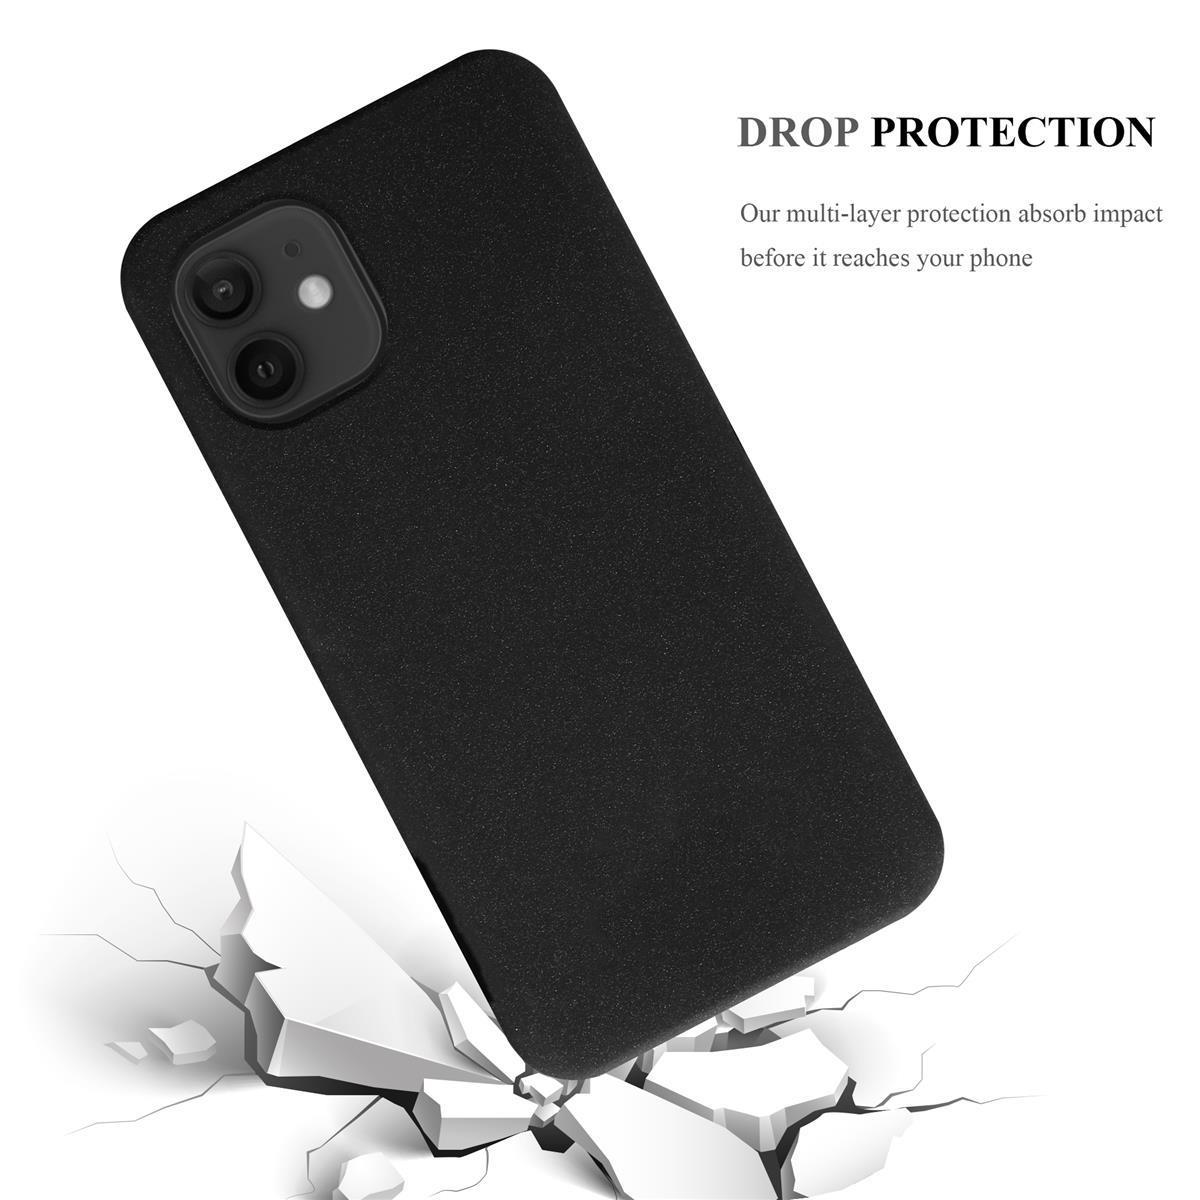 iPhone FROST Apple, 12 CADORABO PRO, TPU 12 Backcover, Frosted / SCHWARZ Schutzhülle,